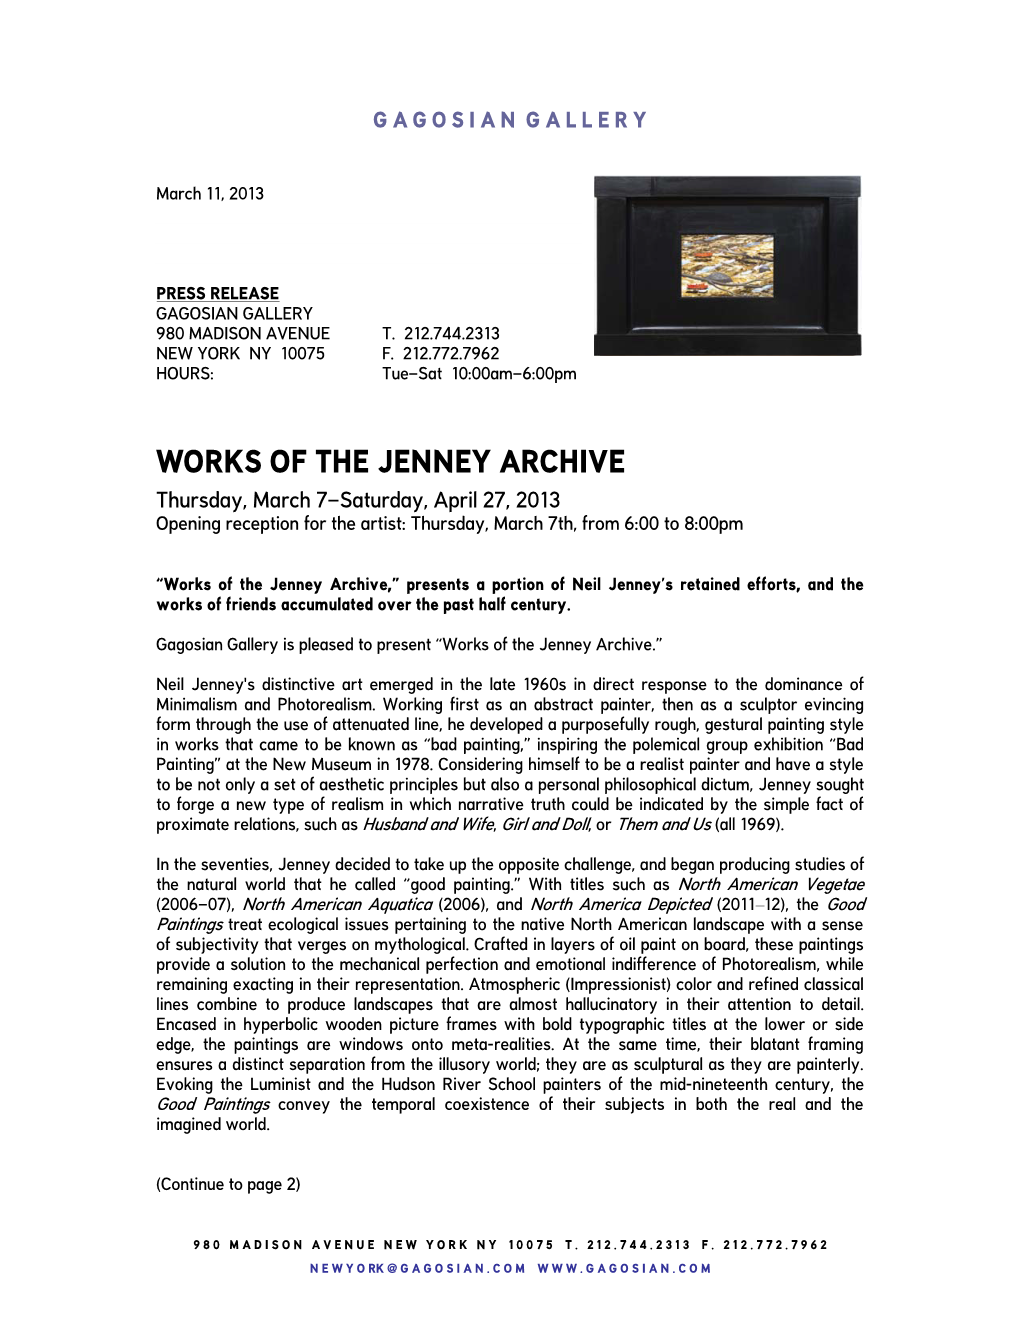 Works of the Jenney Archive